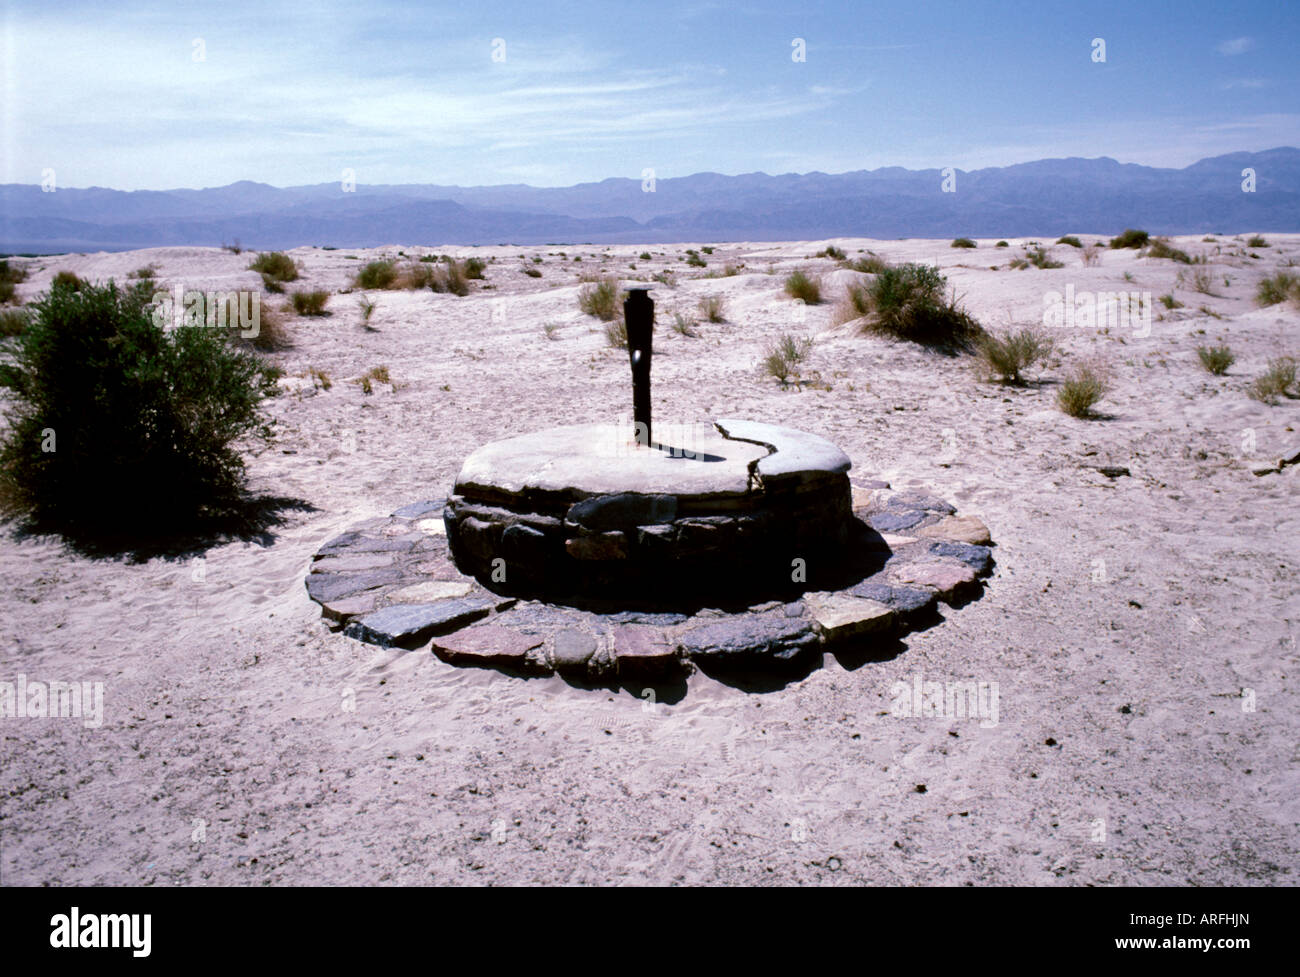 CA Death Valley National Park Stovepipe well desert wilderness arid mountains dry barren Stock Photo